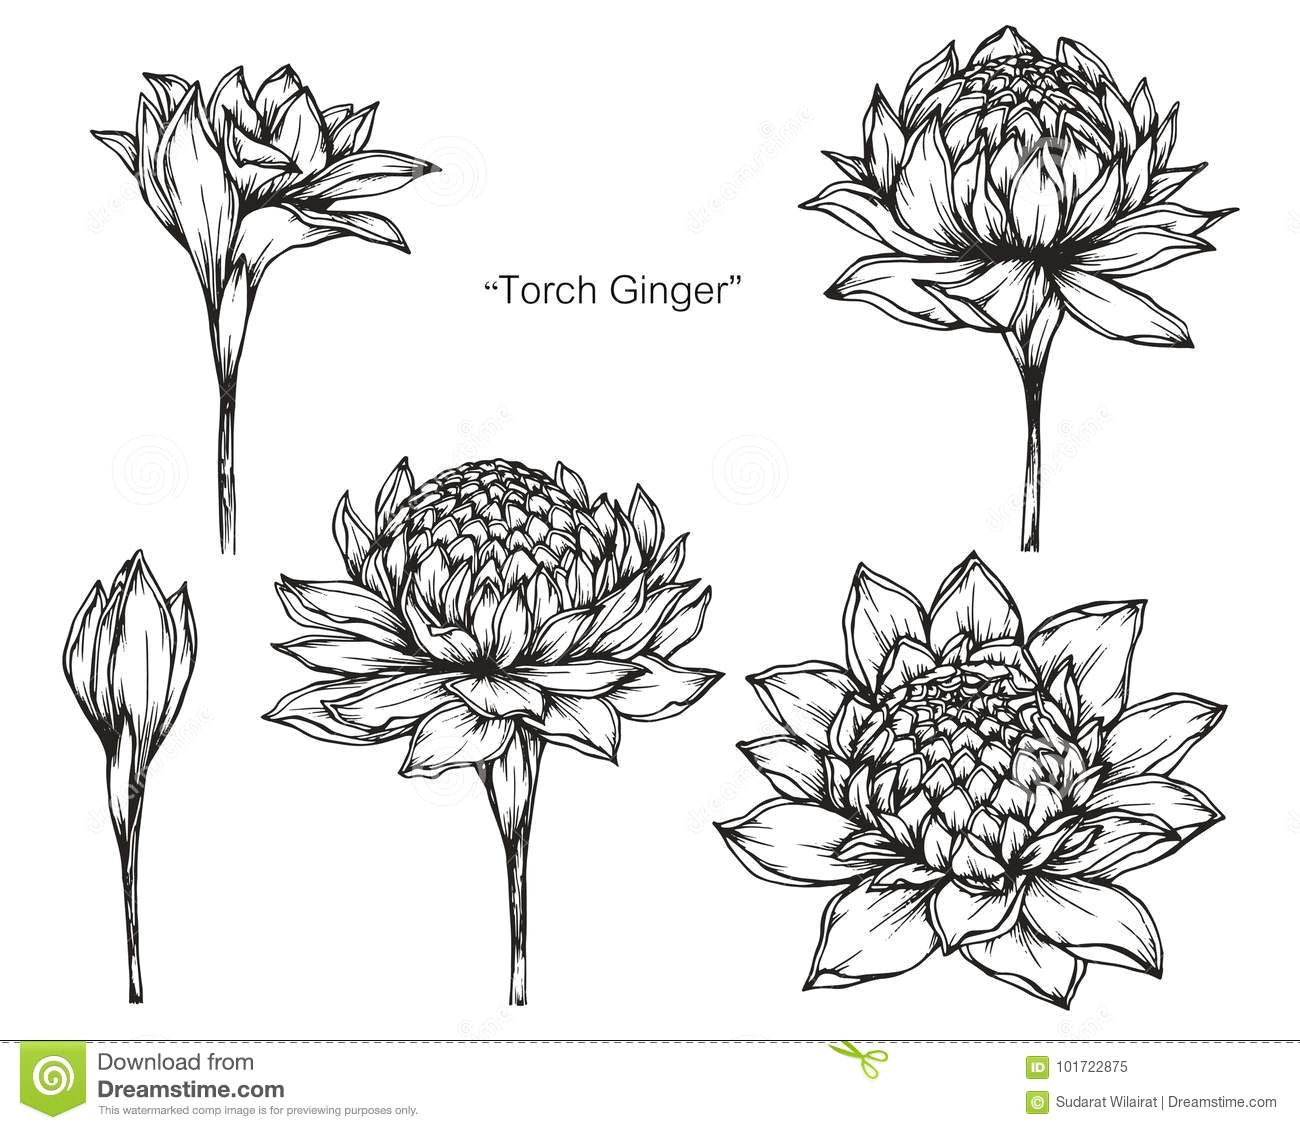 Drawings Of Flower Plants torch Ginger Flower Drawing and Sketch Stock Illustration